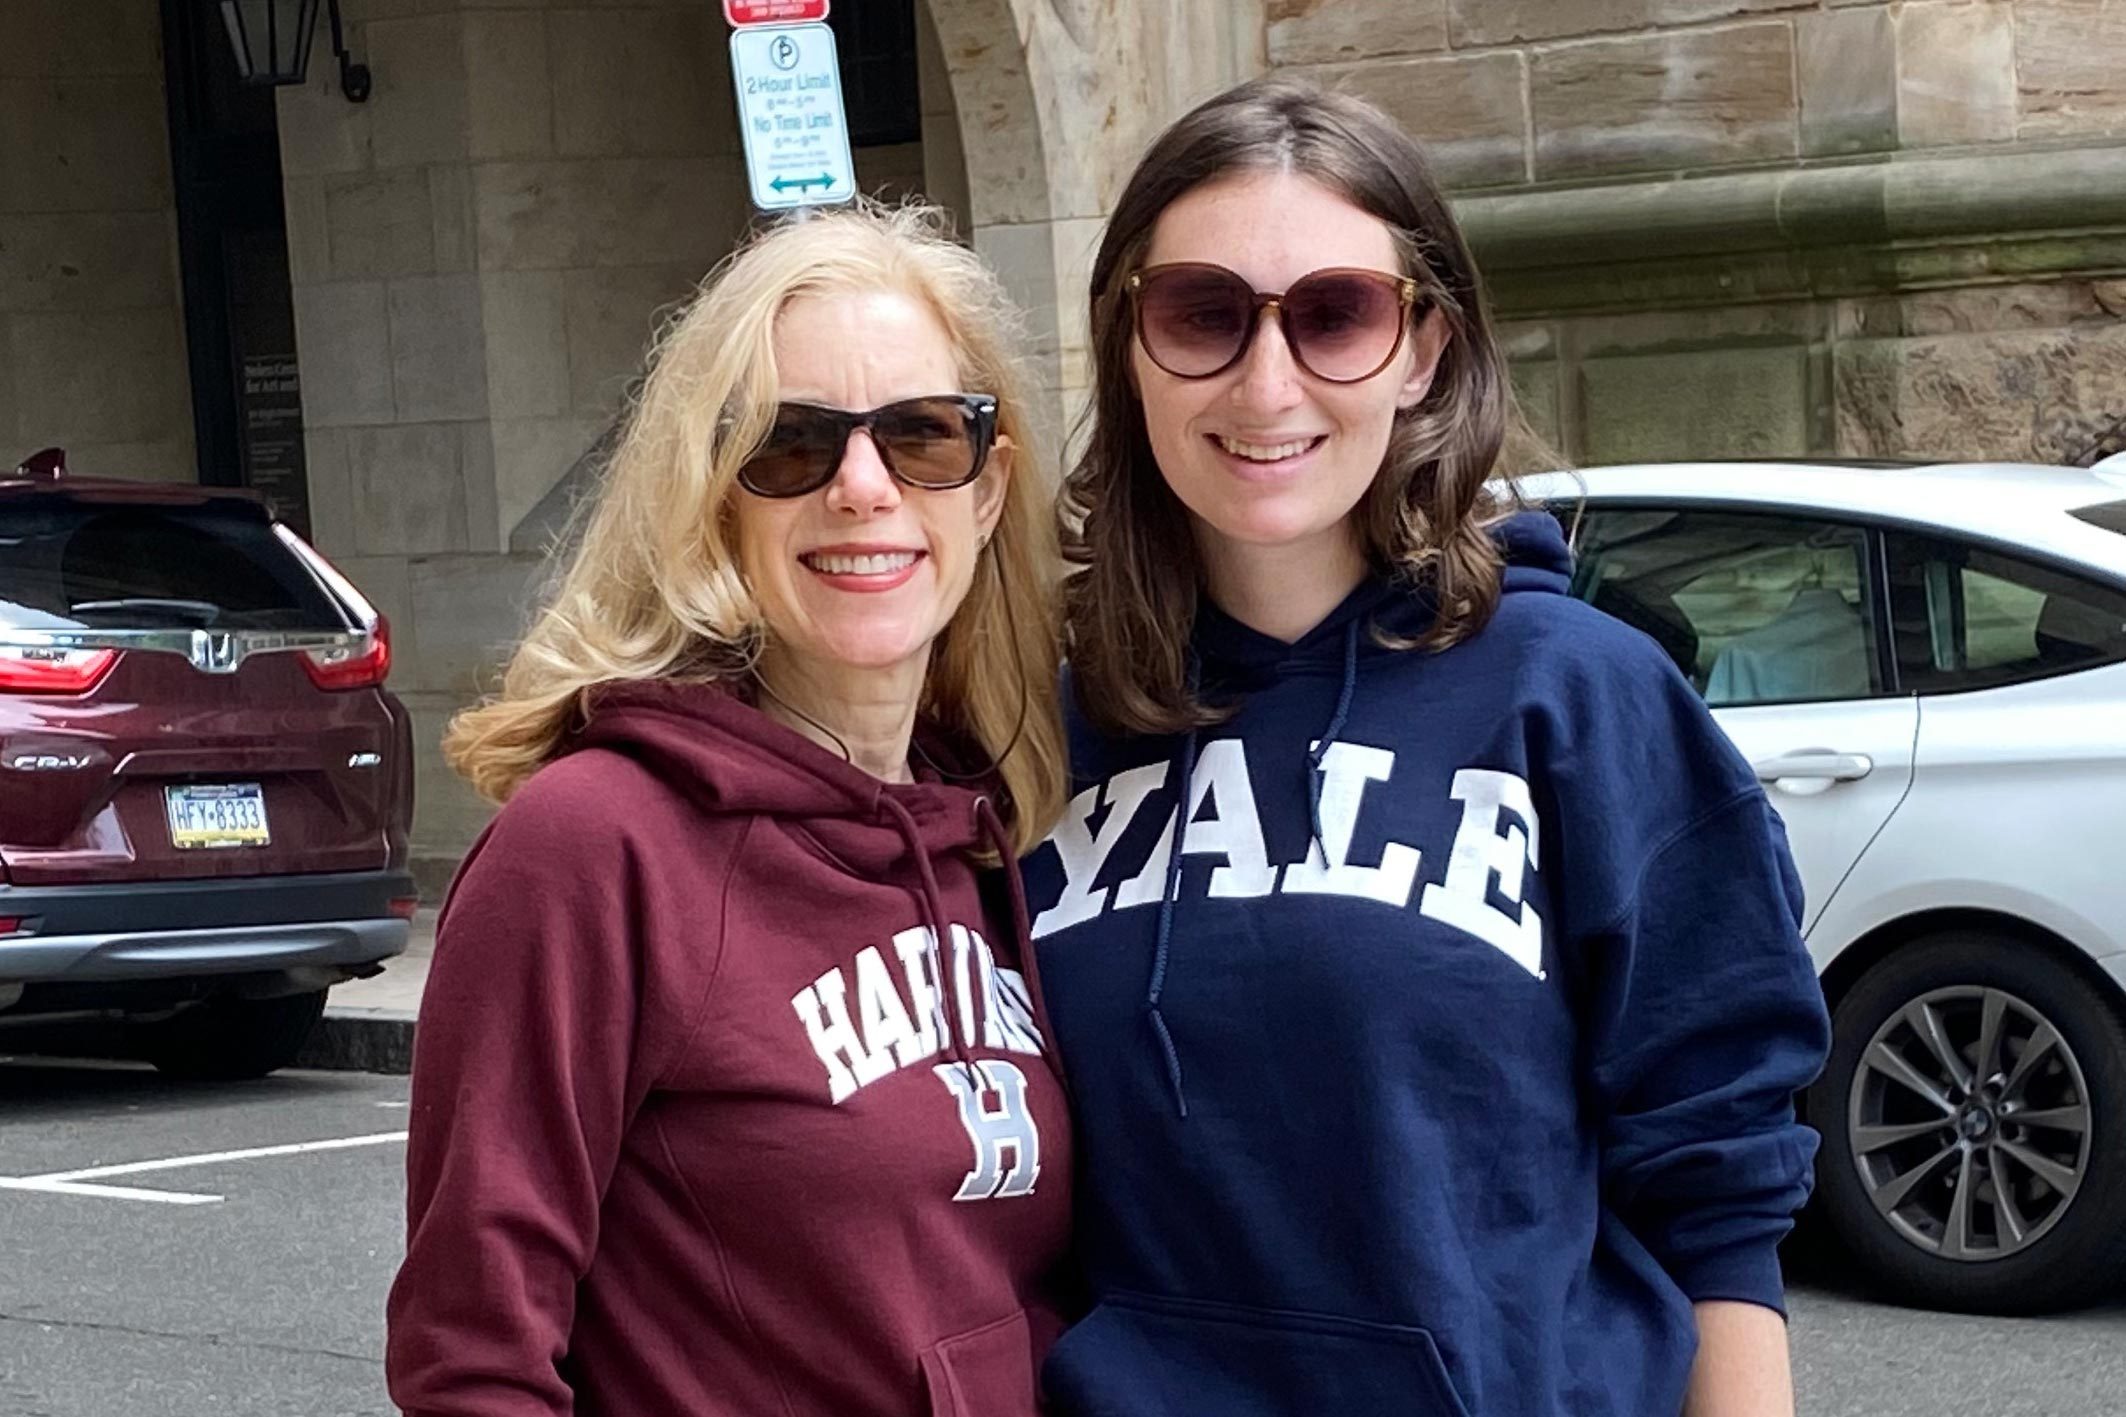 Janice Lintz And Daughter in college sweatshirts, harvard and yale, respectively